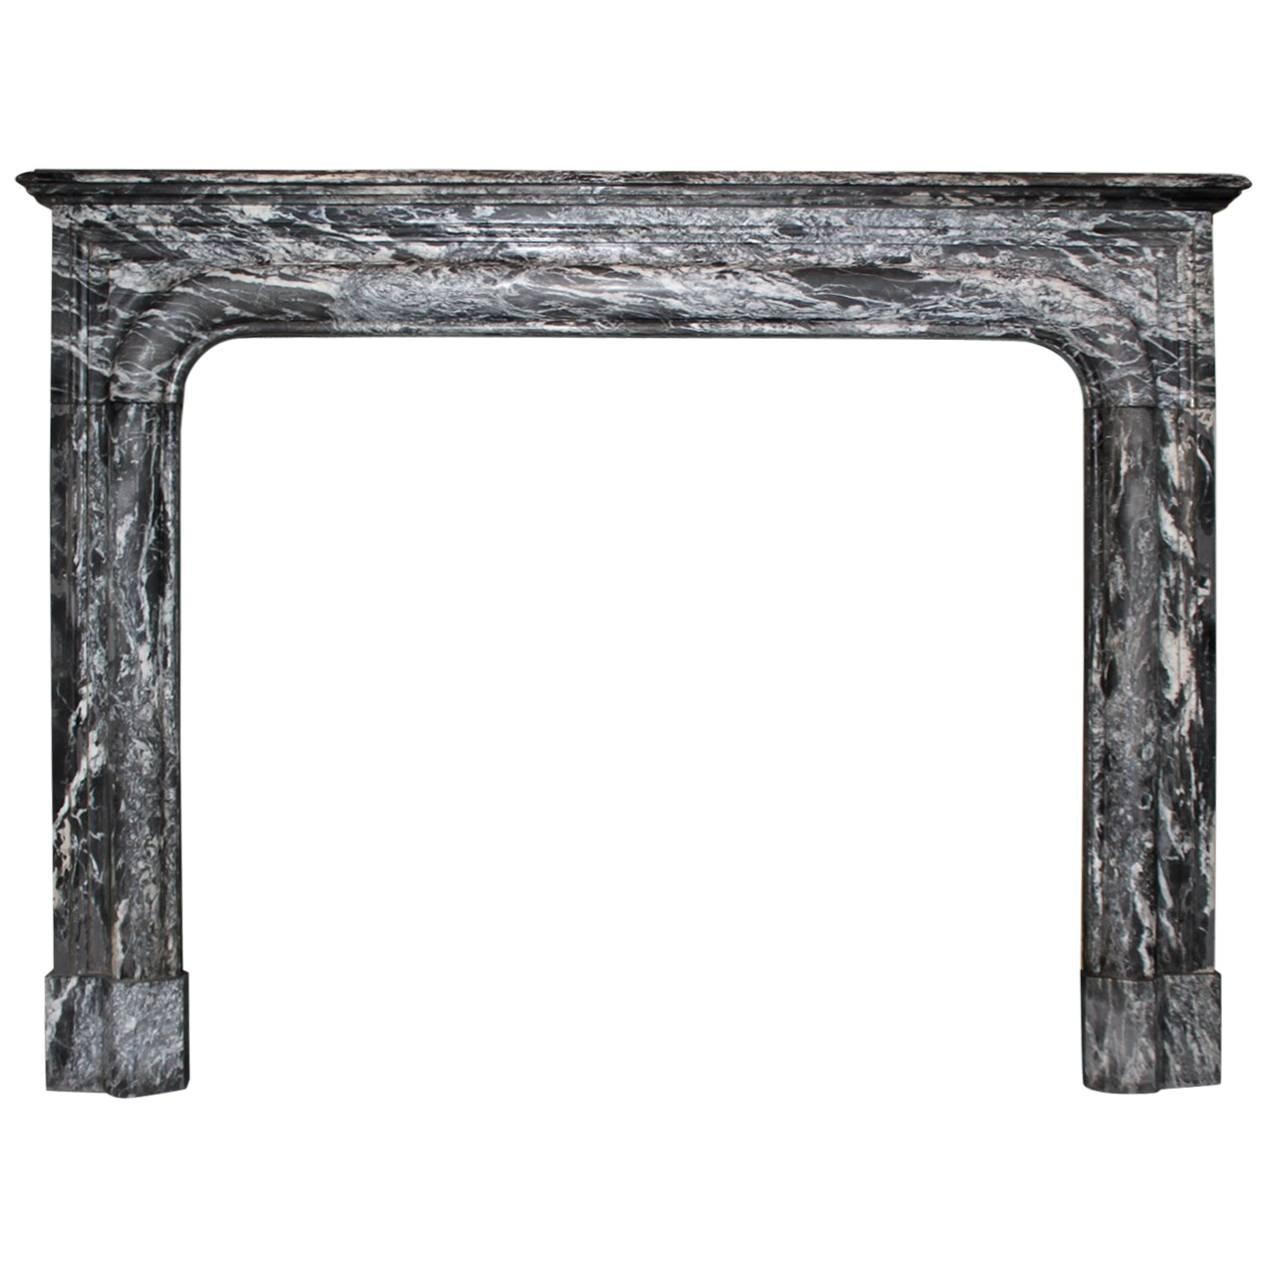 Antique Black Marble Fireplace mantel from the 19th Century